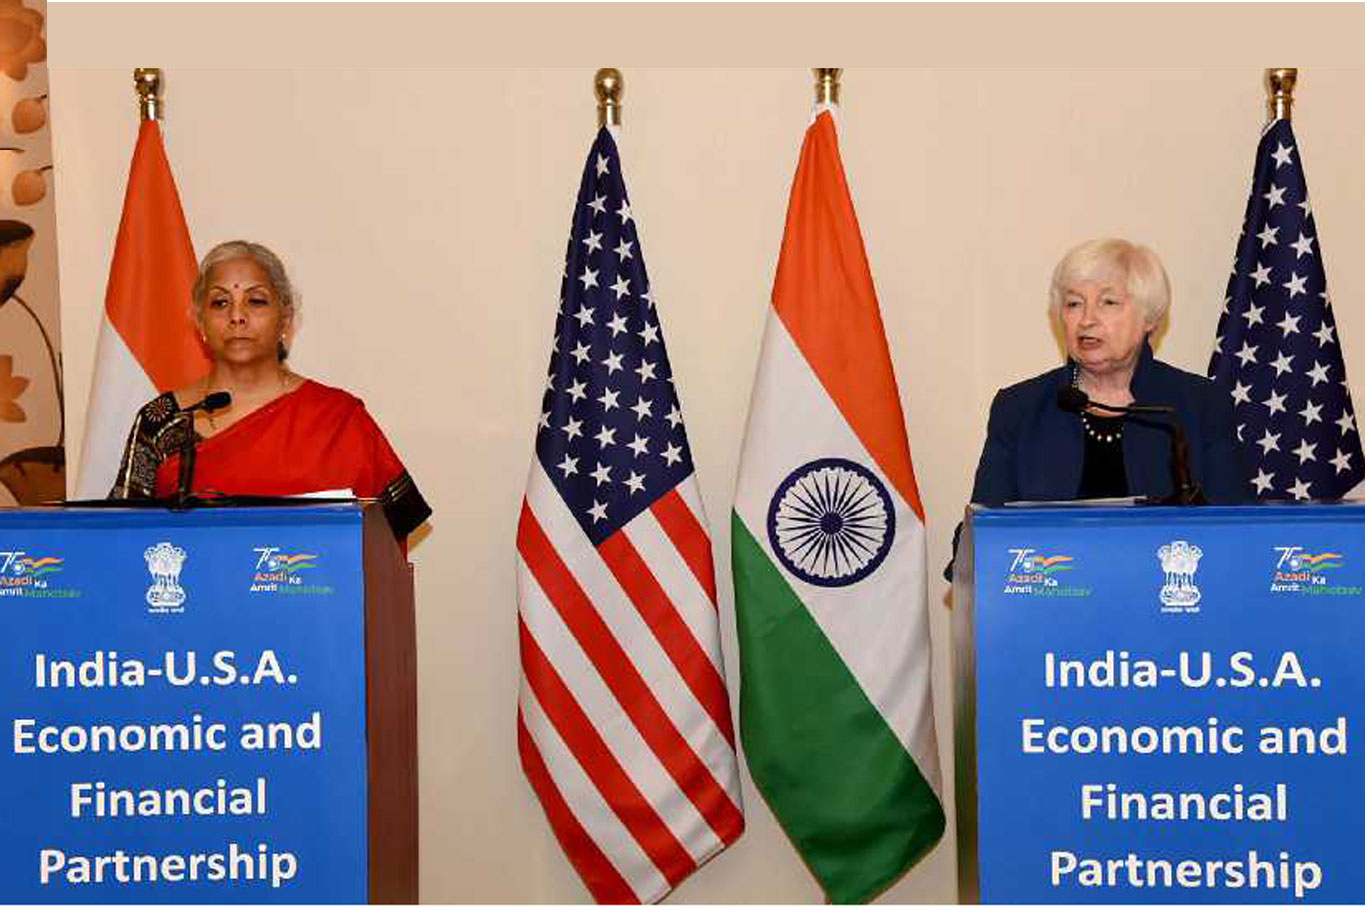 Yellen's India visit focuses on strengthening ties and addressing global economic issues.